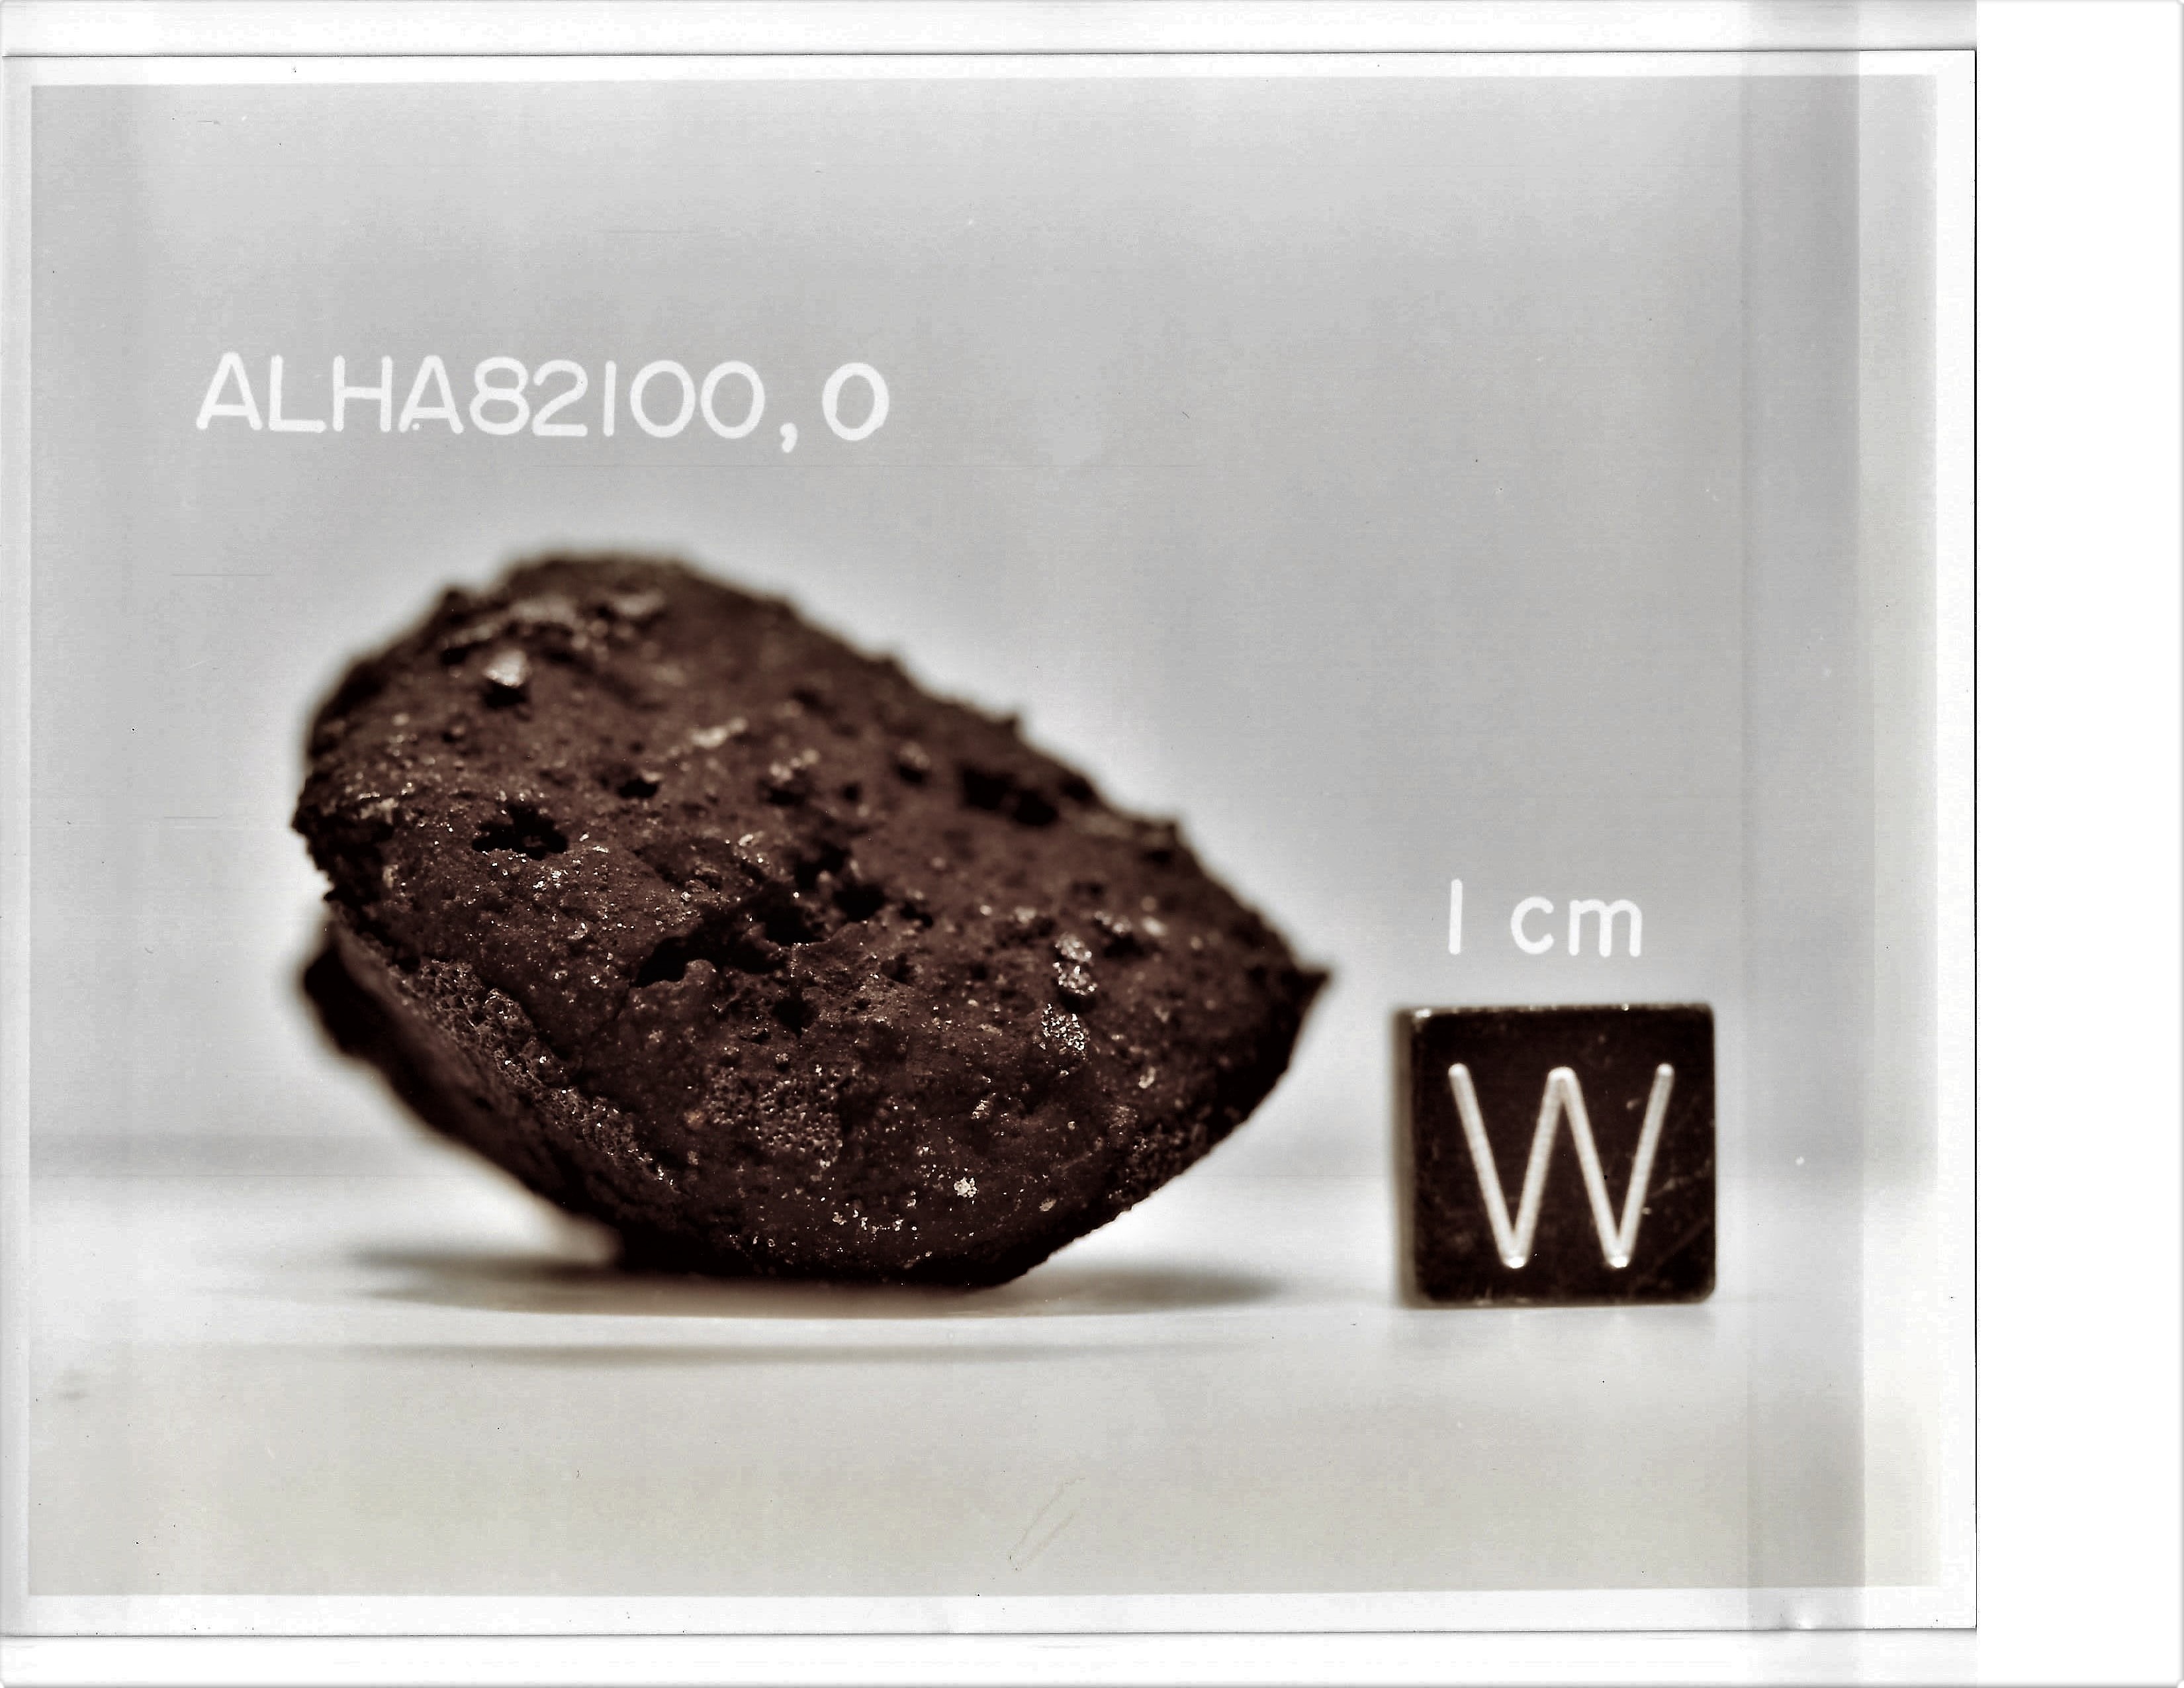 Lab Photo of Sample ALH 82100 Displaying West Orientation